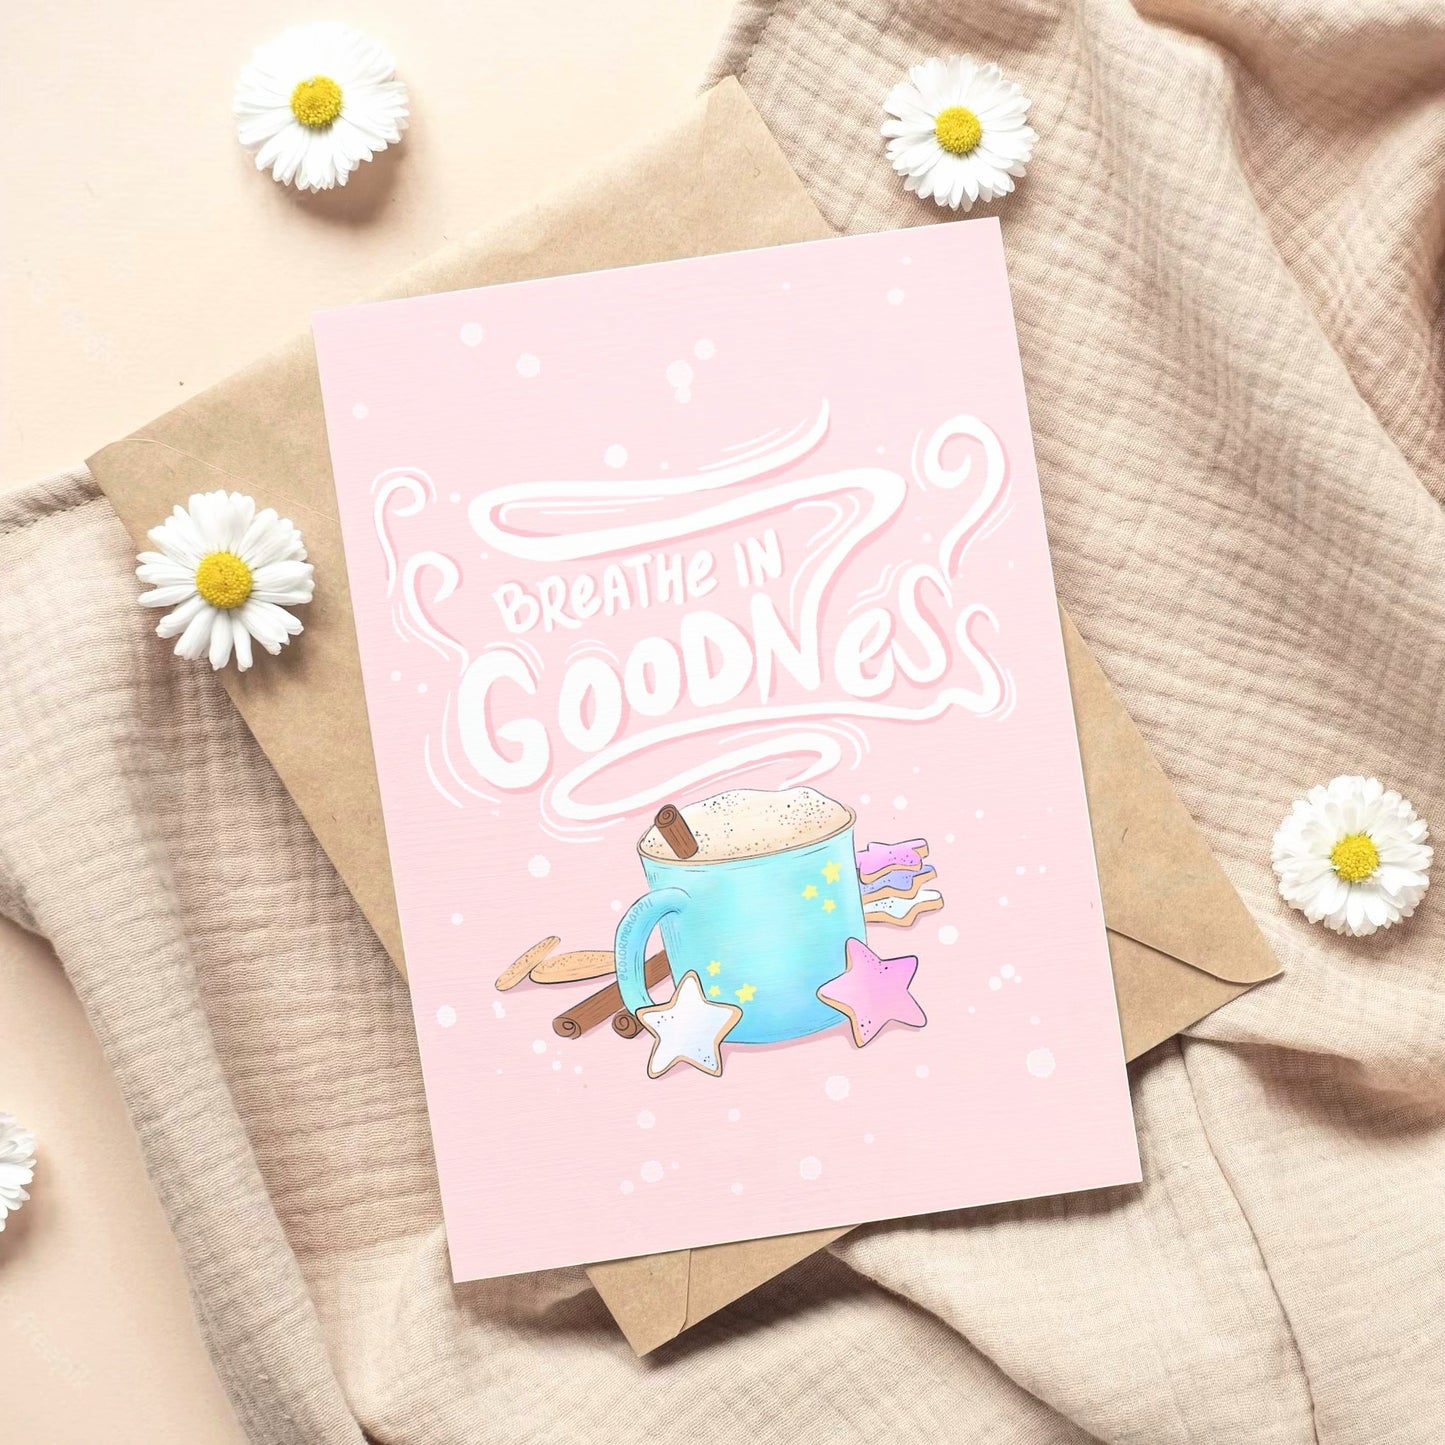 Breathe in Goodness - Greeting Card